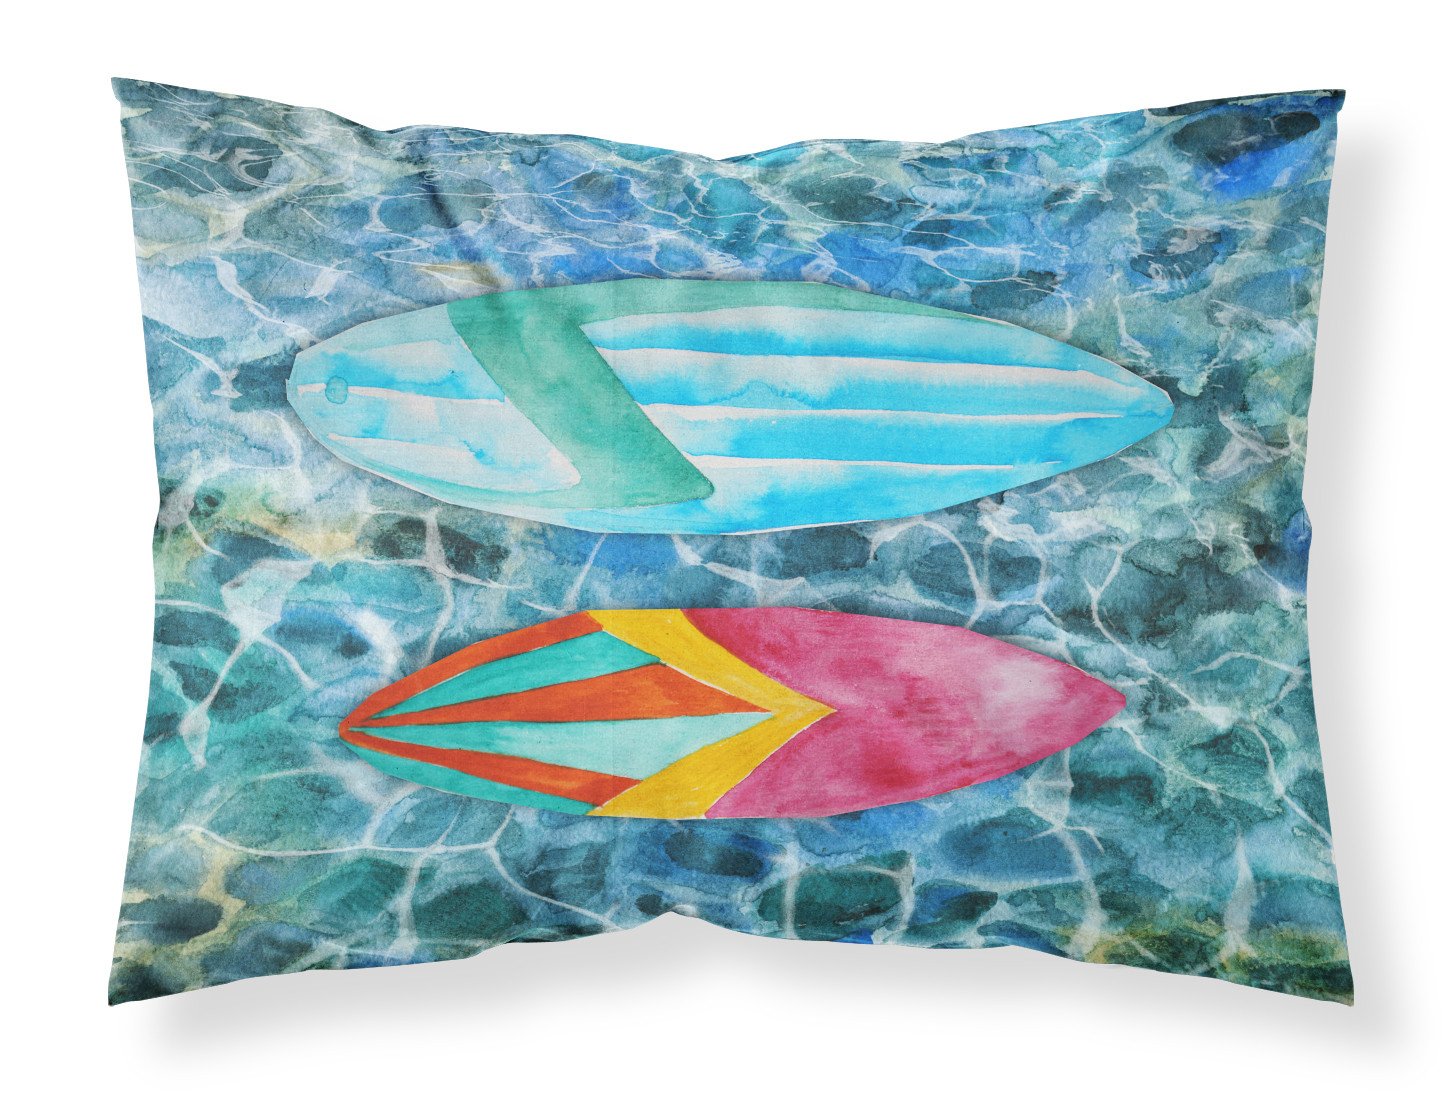 Surf Boards on the Water Fabric Standard Pillowcase BB5366PILLOWCASE by Caroline's Treasures